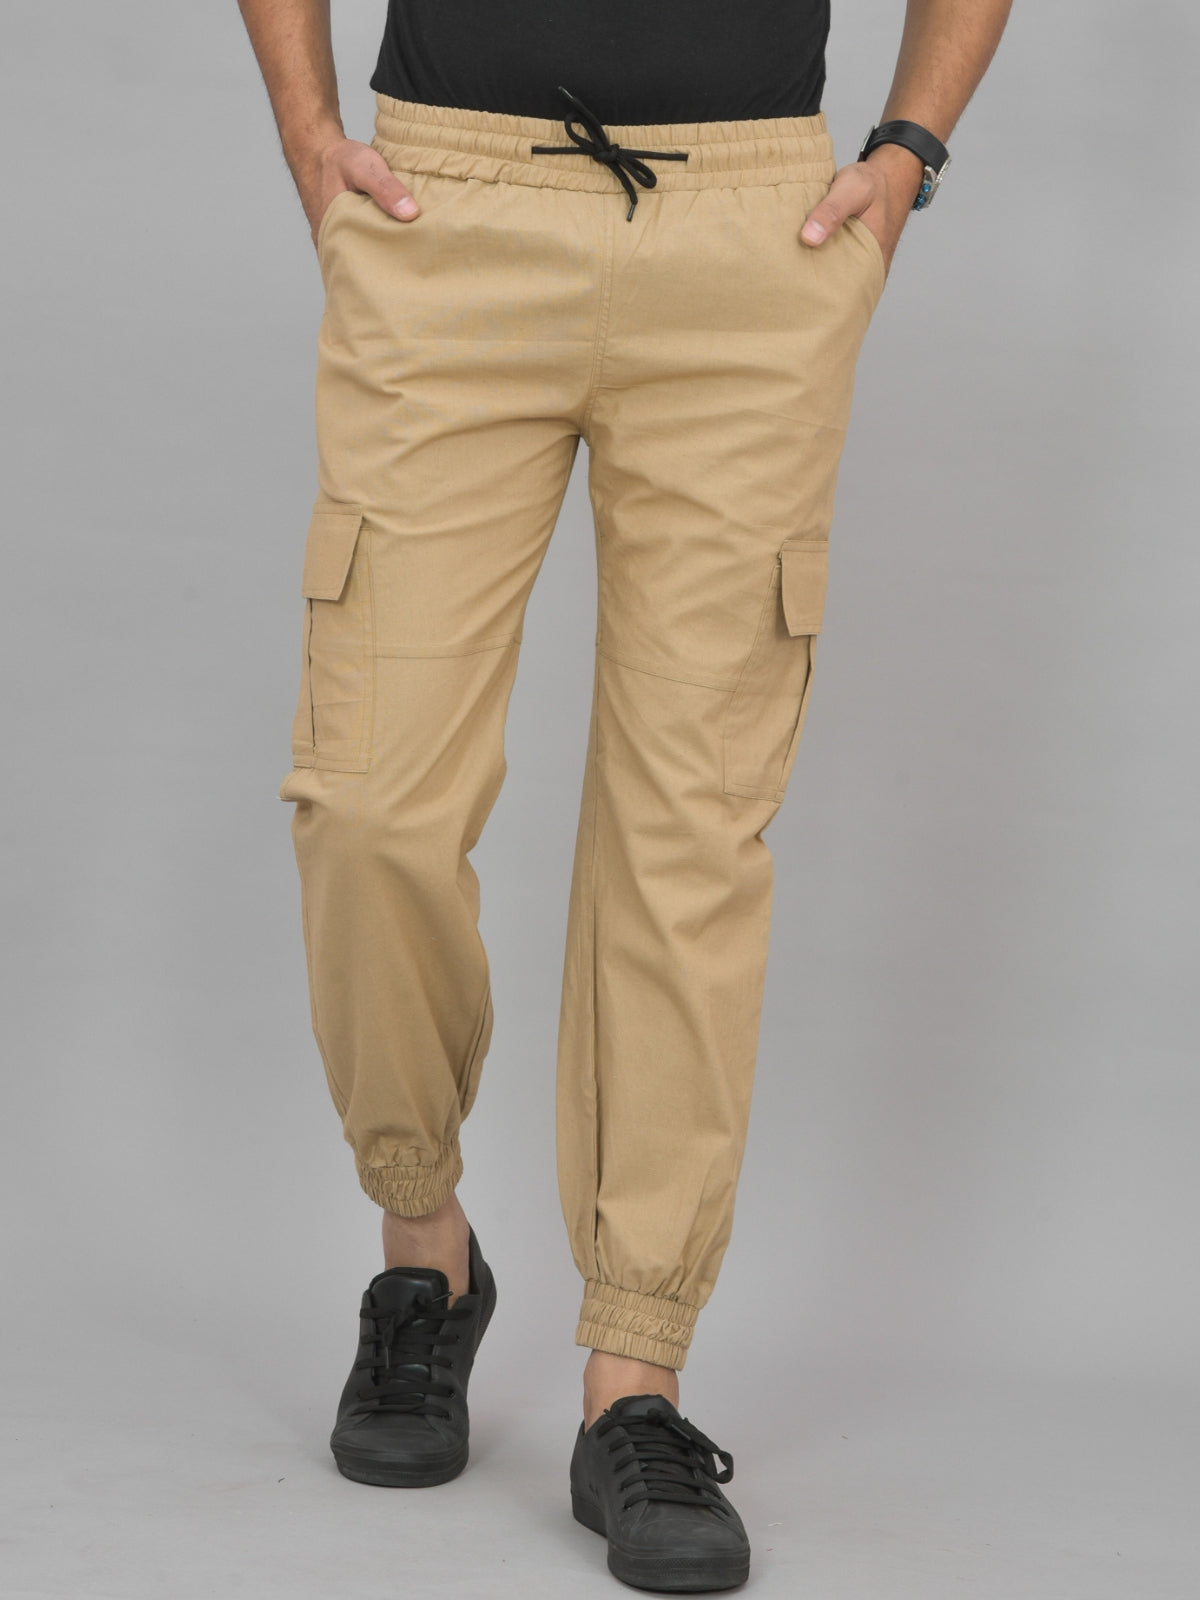 Combo Pack Of Mens Mehndi Green And Beige Five Pocket Cotton Cargo Pants